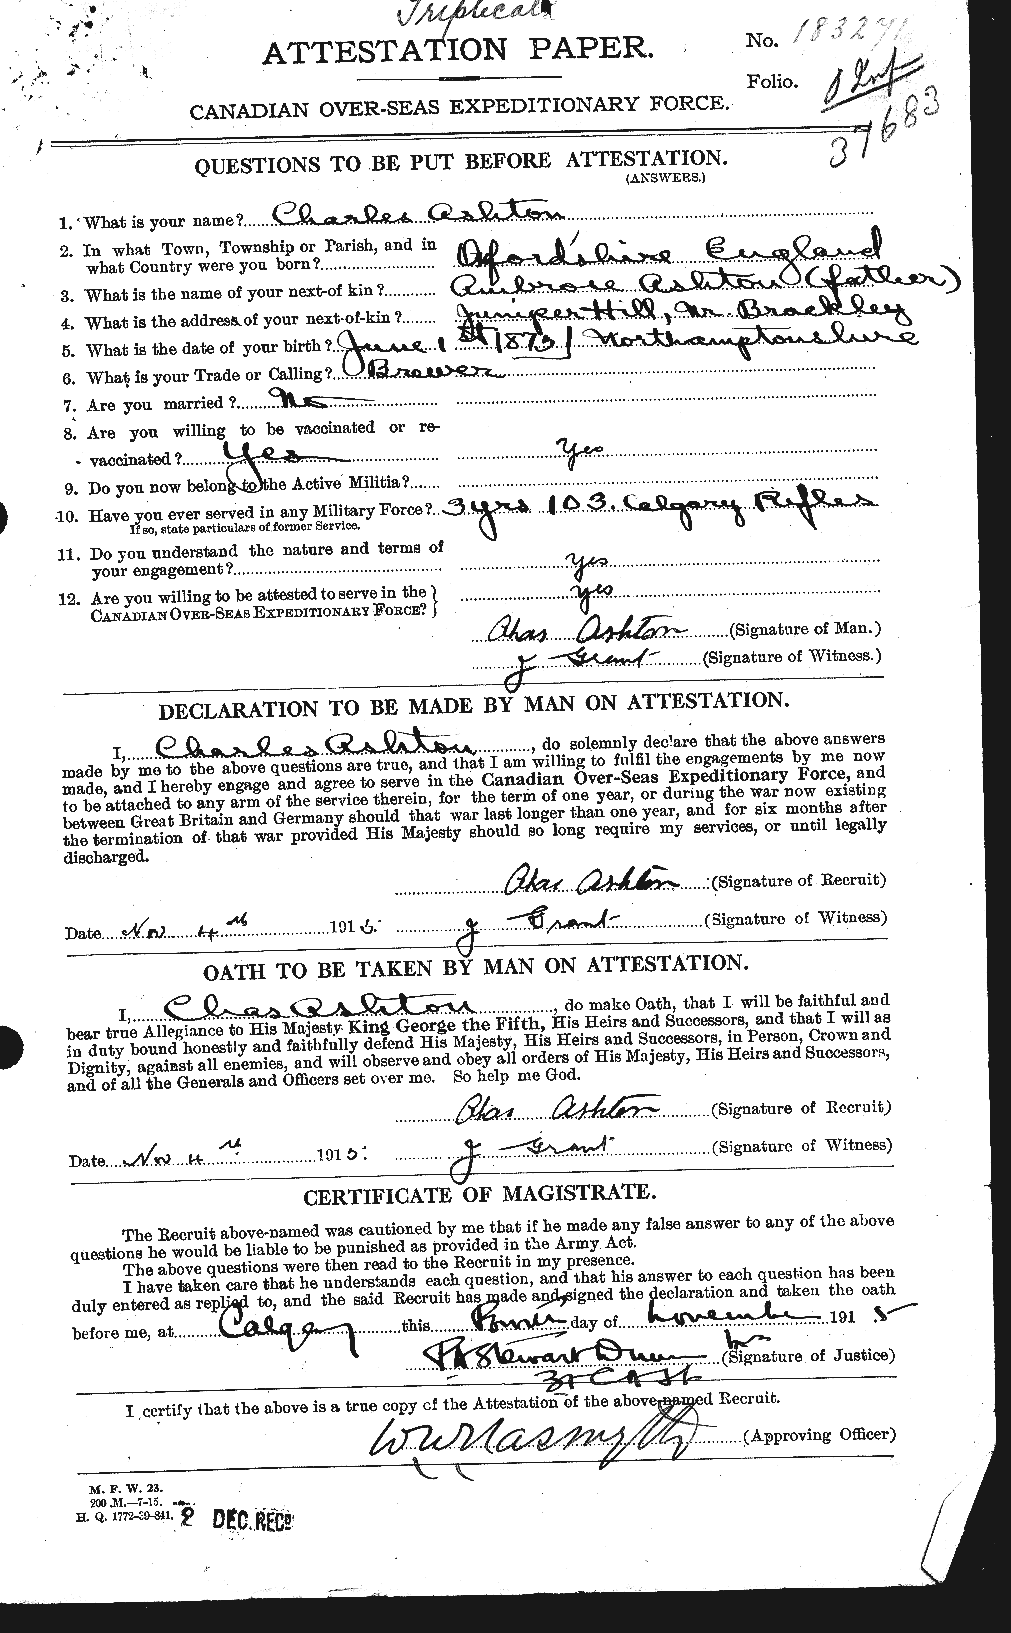 Personnel Records of the First World War - CEF 223091a